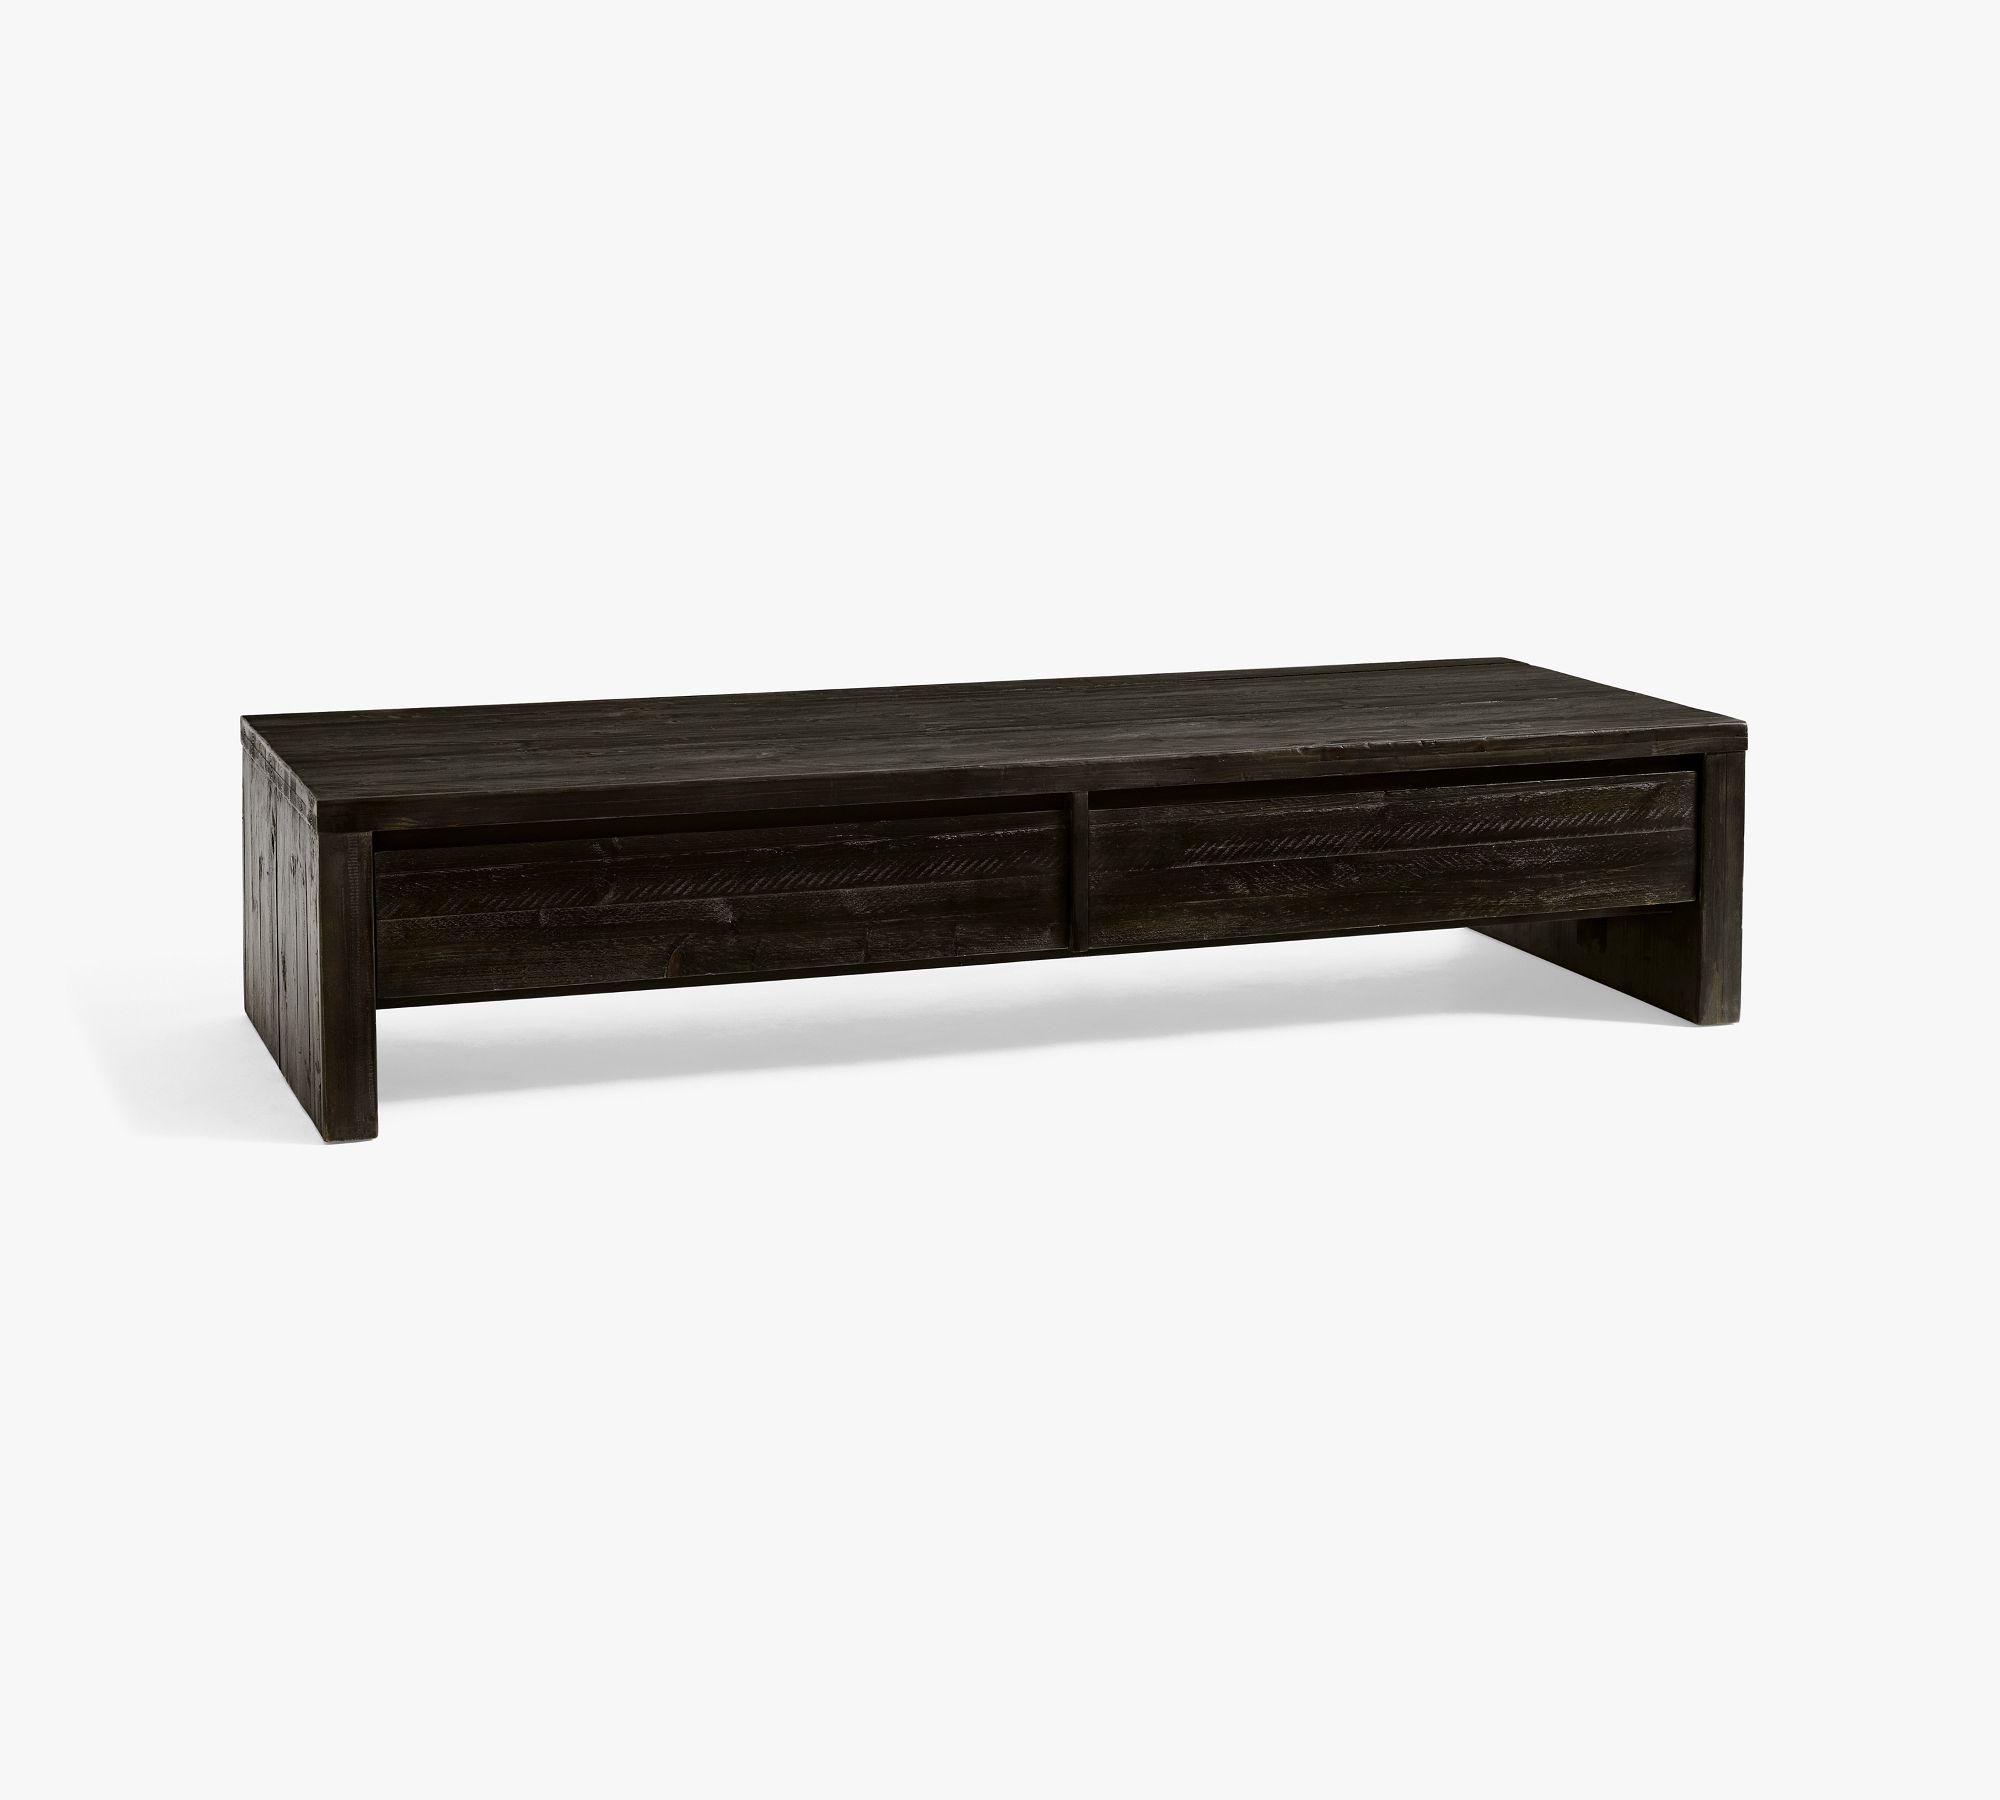 Pismo Reclaimed Wood Rectangular Long Low Coffee Table (74")